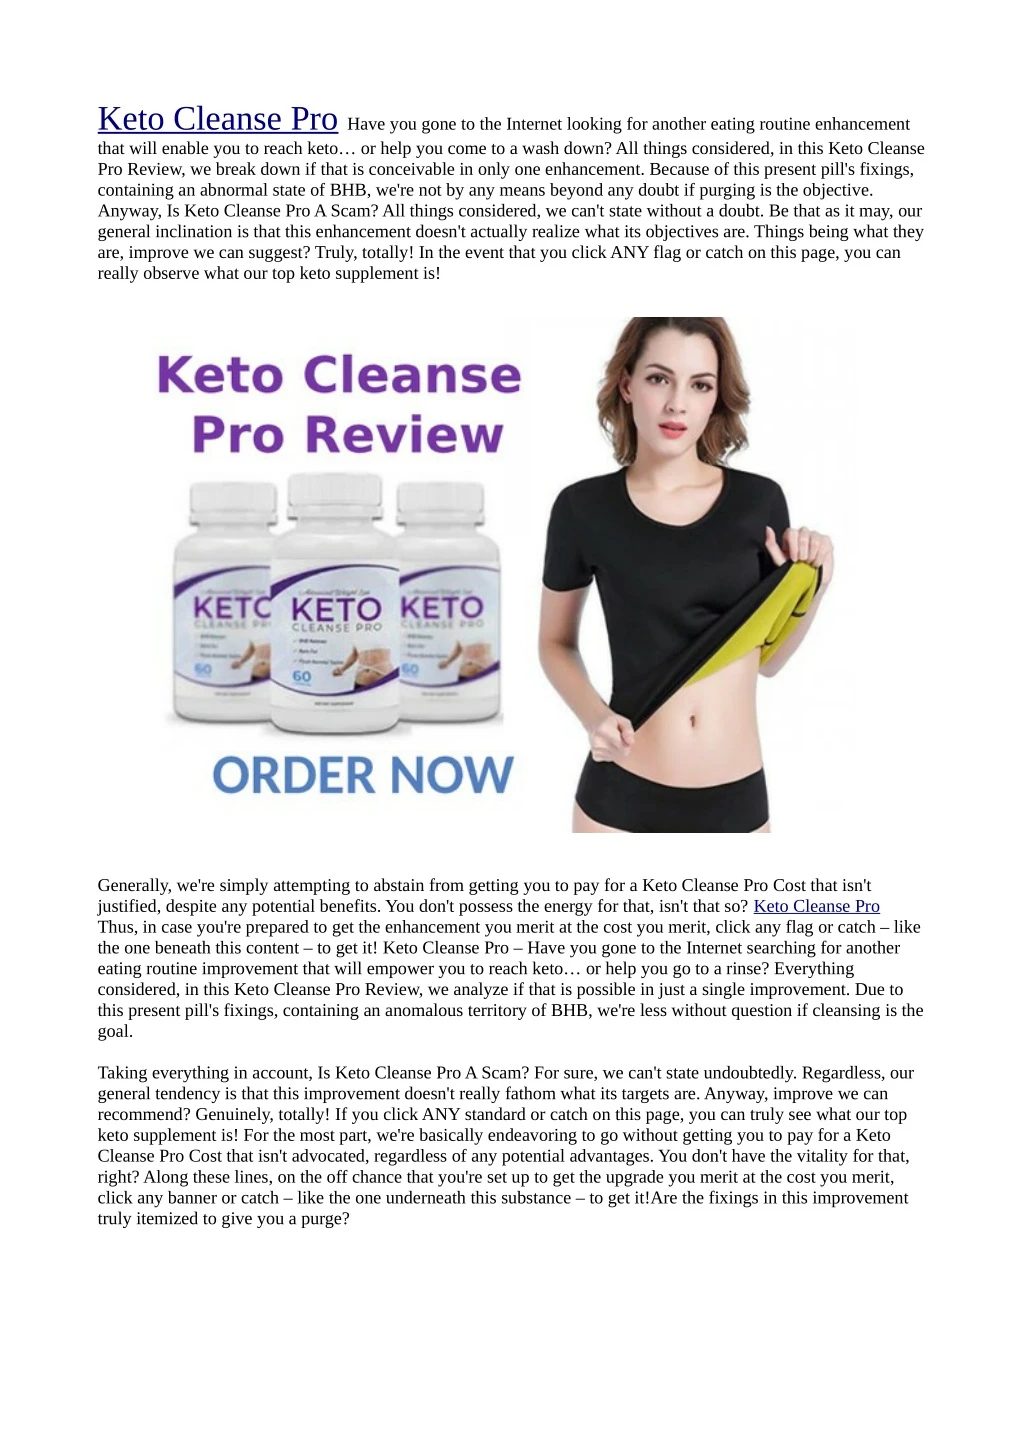 keto cleanse pro have you gone to the internet